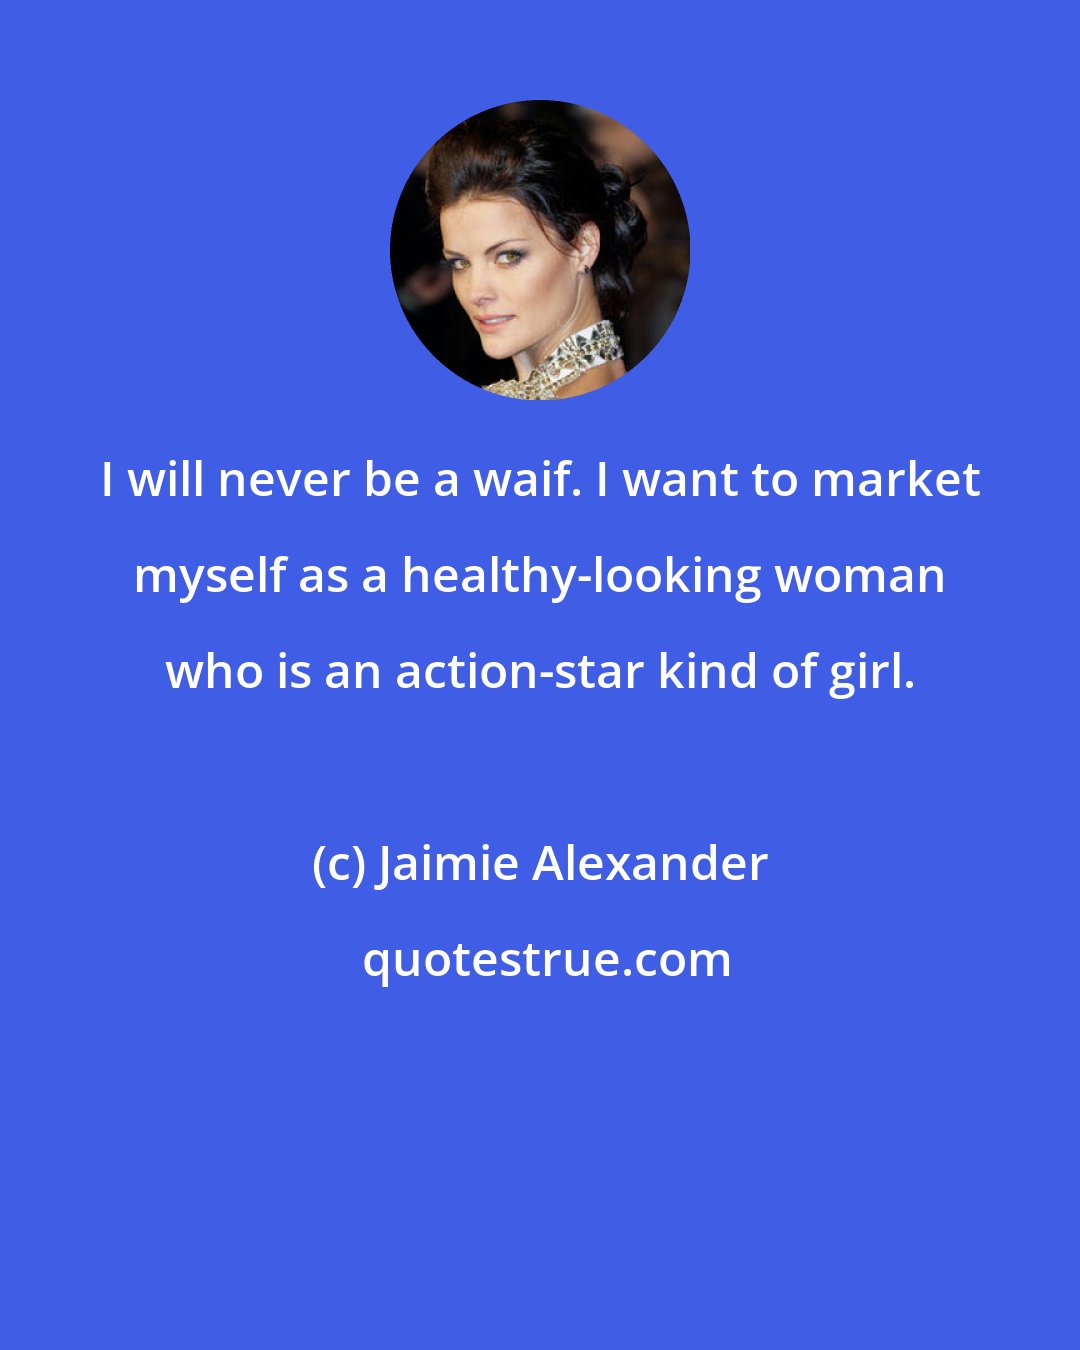 Jaimie Alexander: I will never be a waif. I want to market myself as a healthy-looking woman who is an action-star kind of girl.